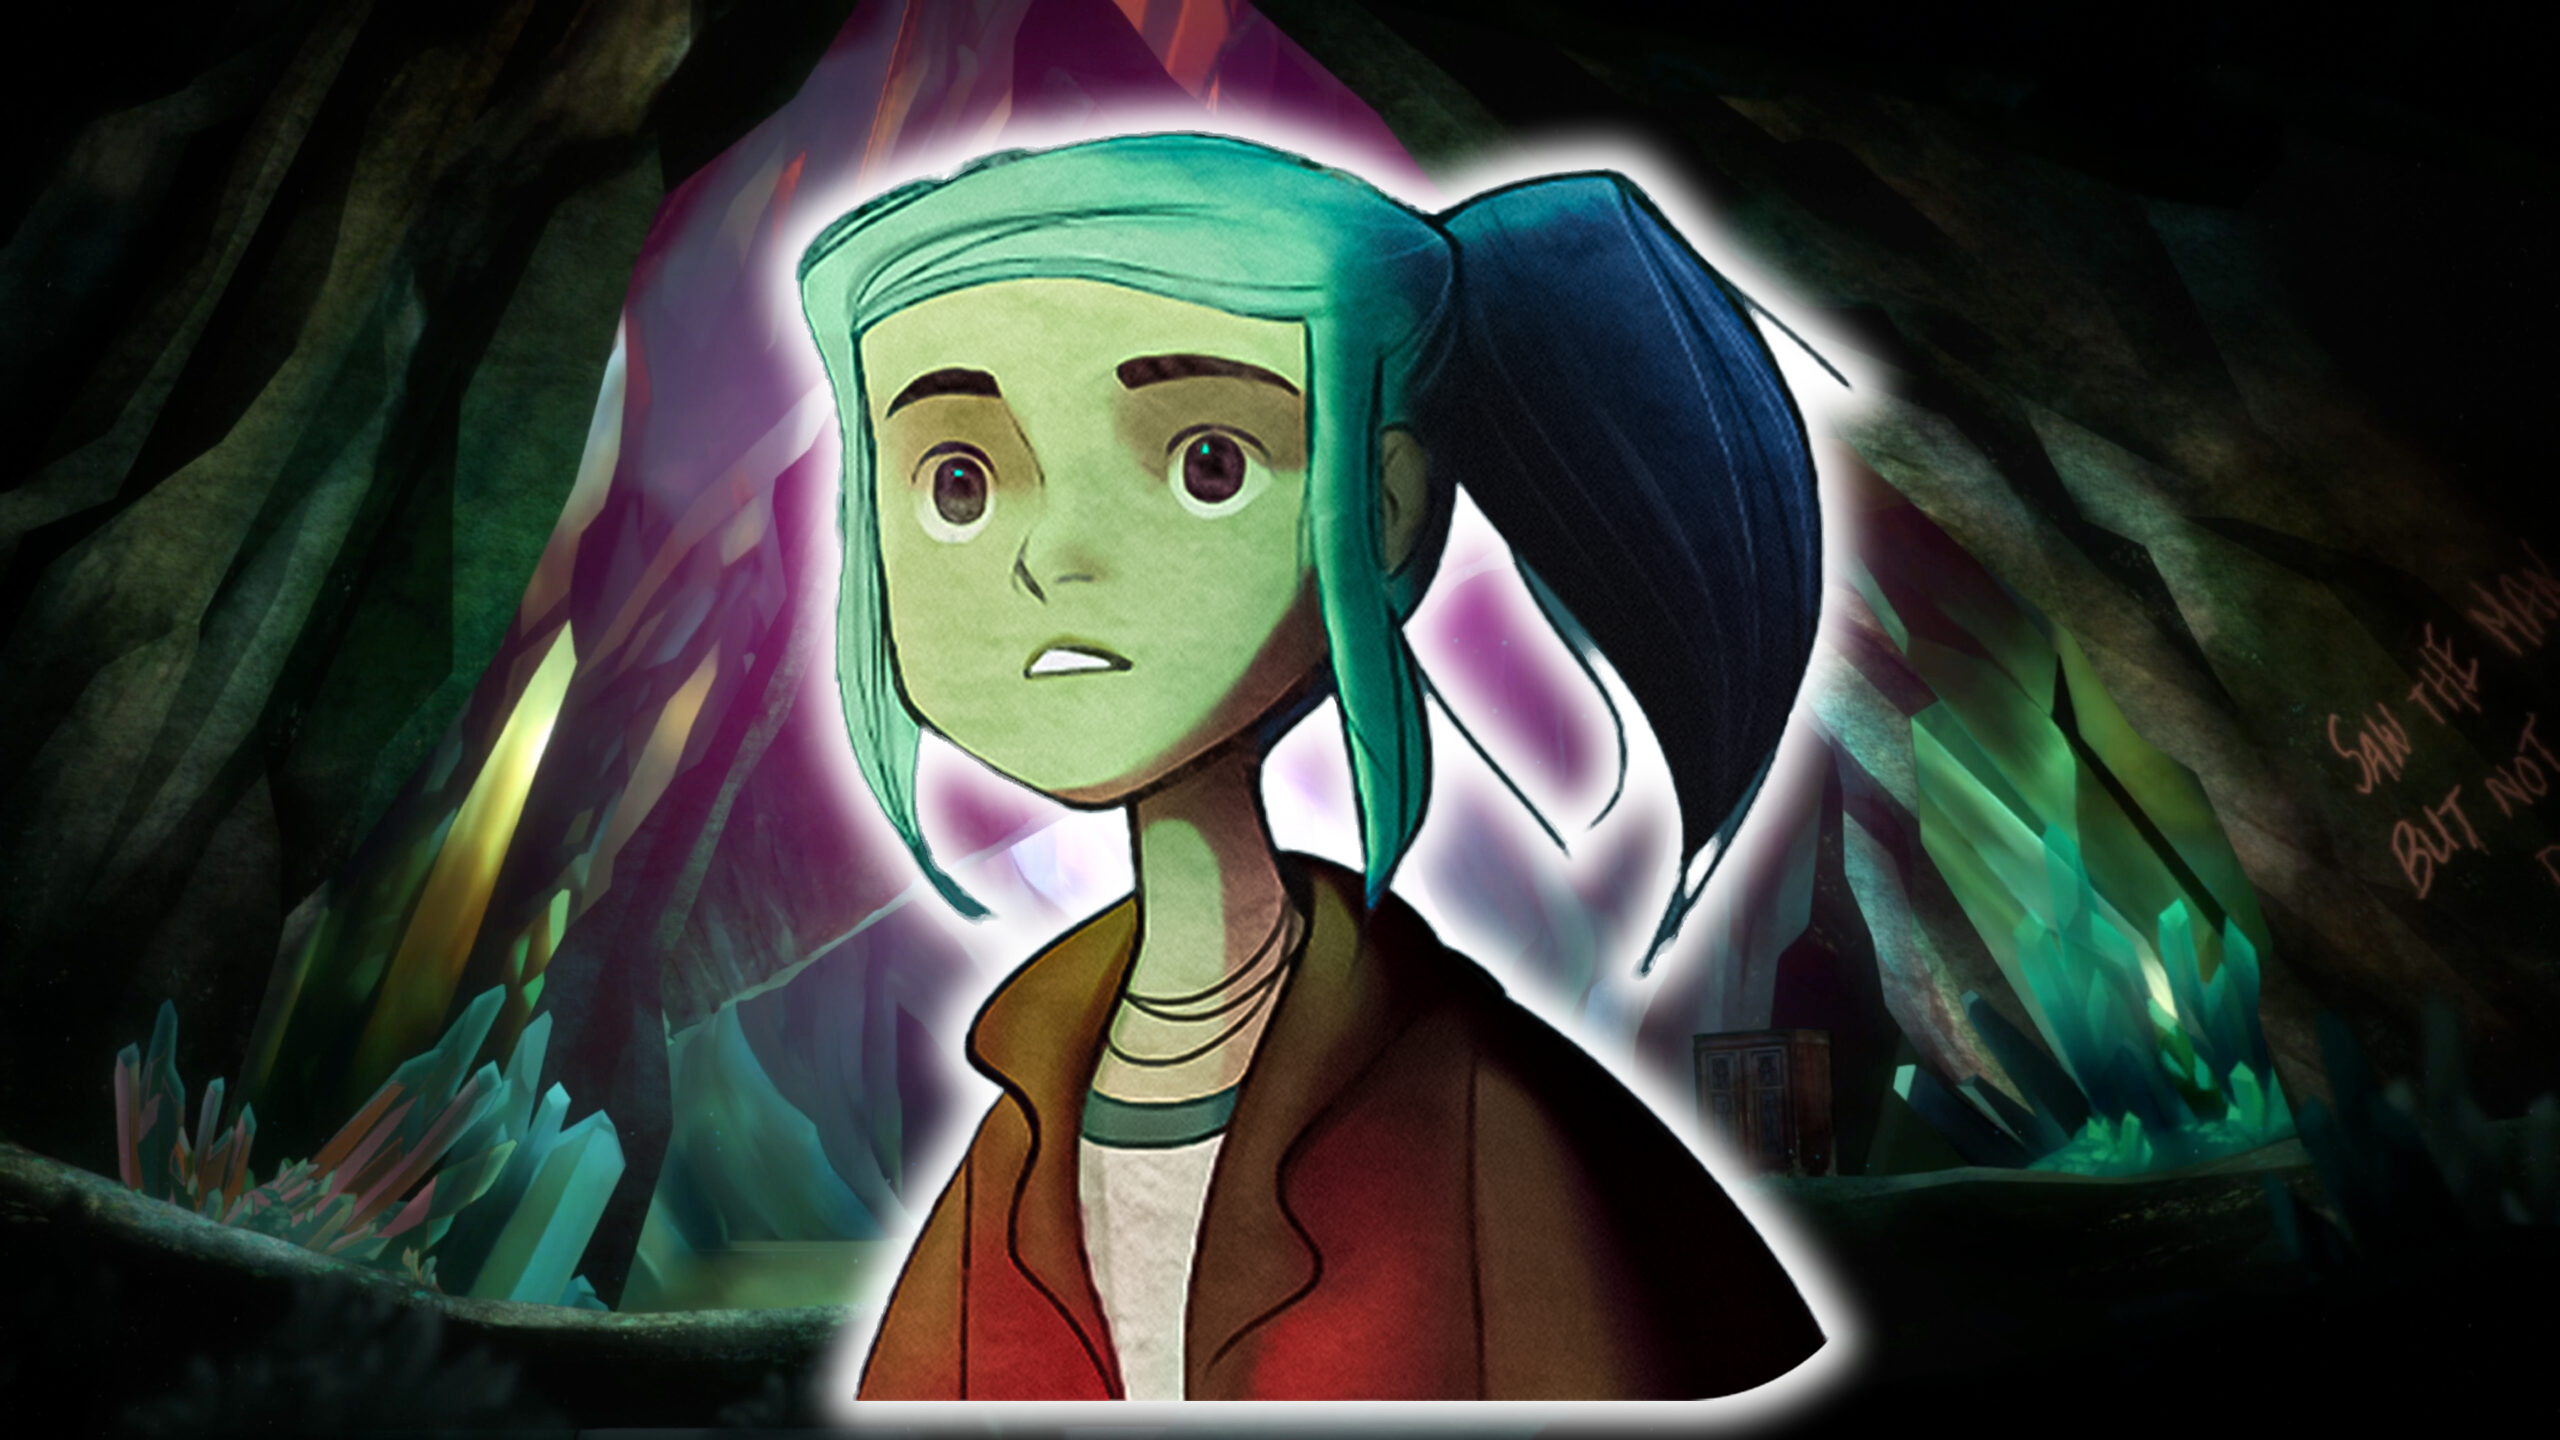 OXENFREE II Lost Signals for mac download free